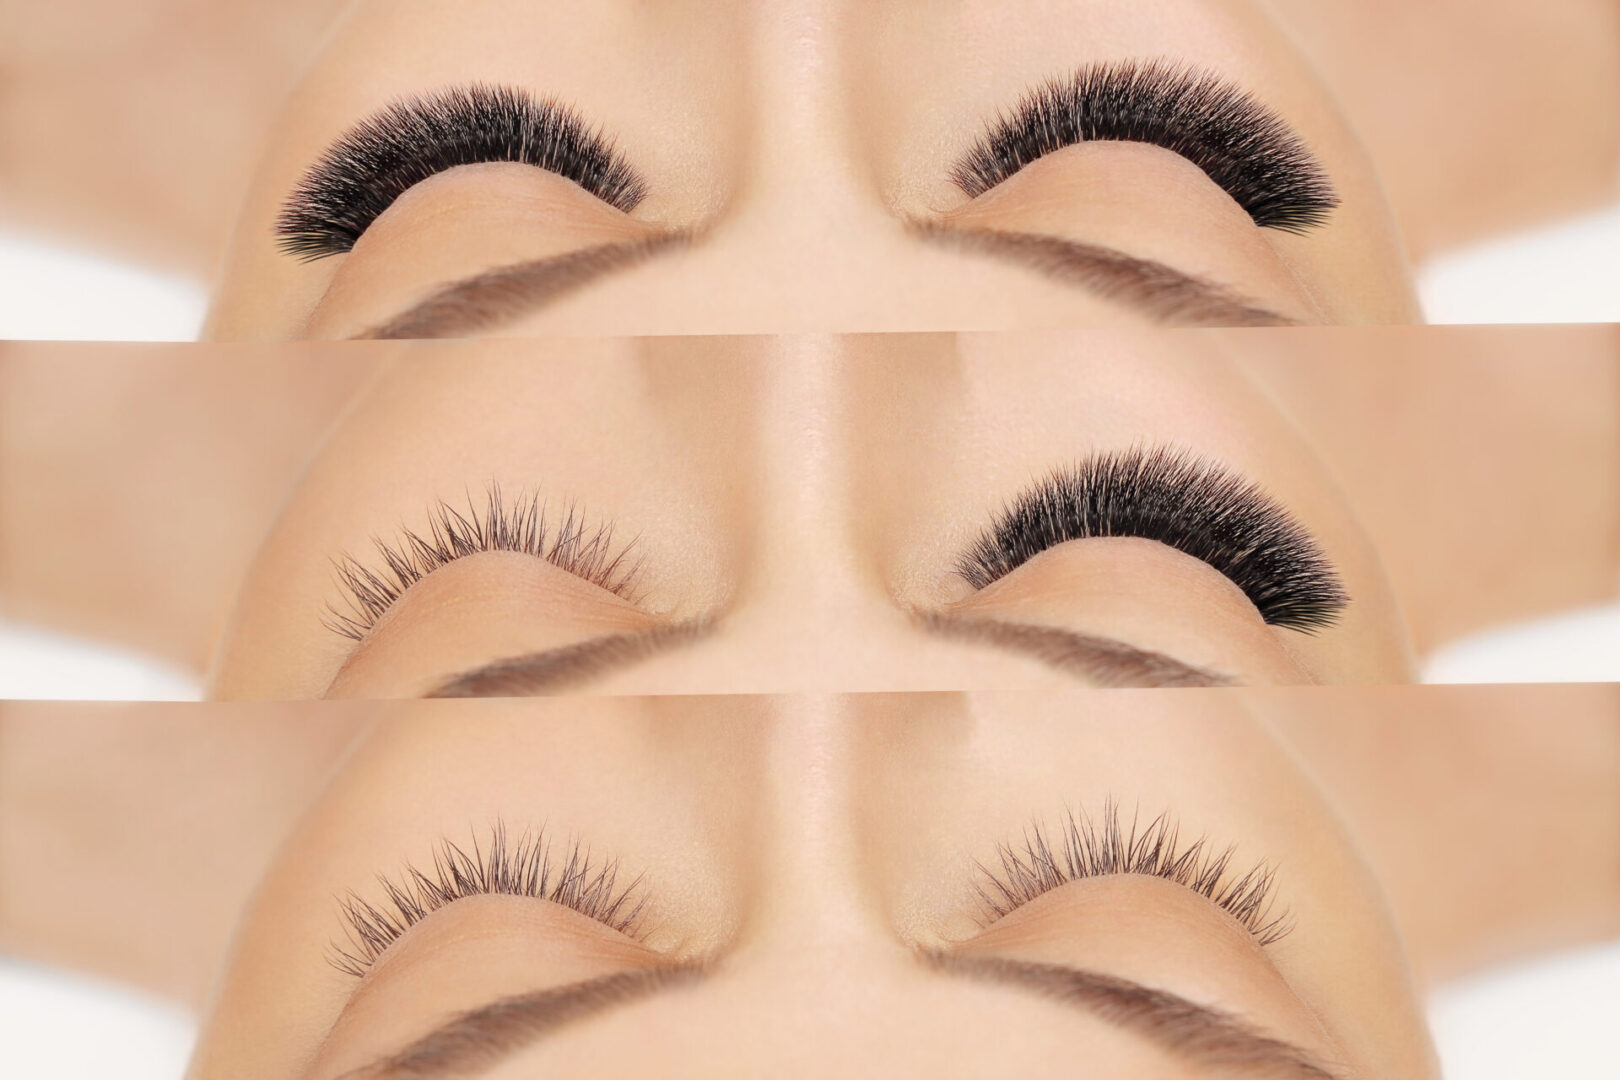 A woman with different eye lashes and her eyes closed.